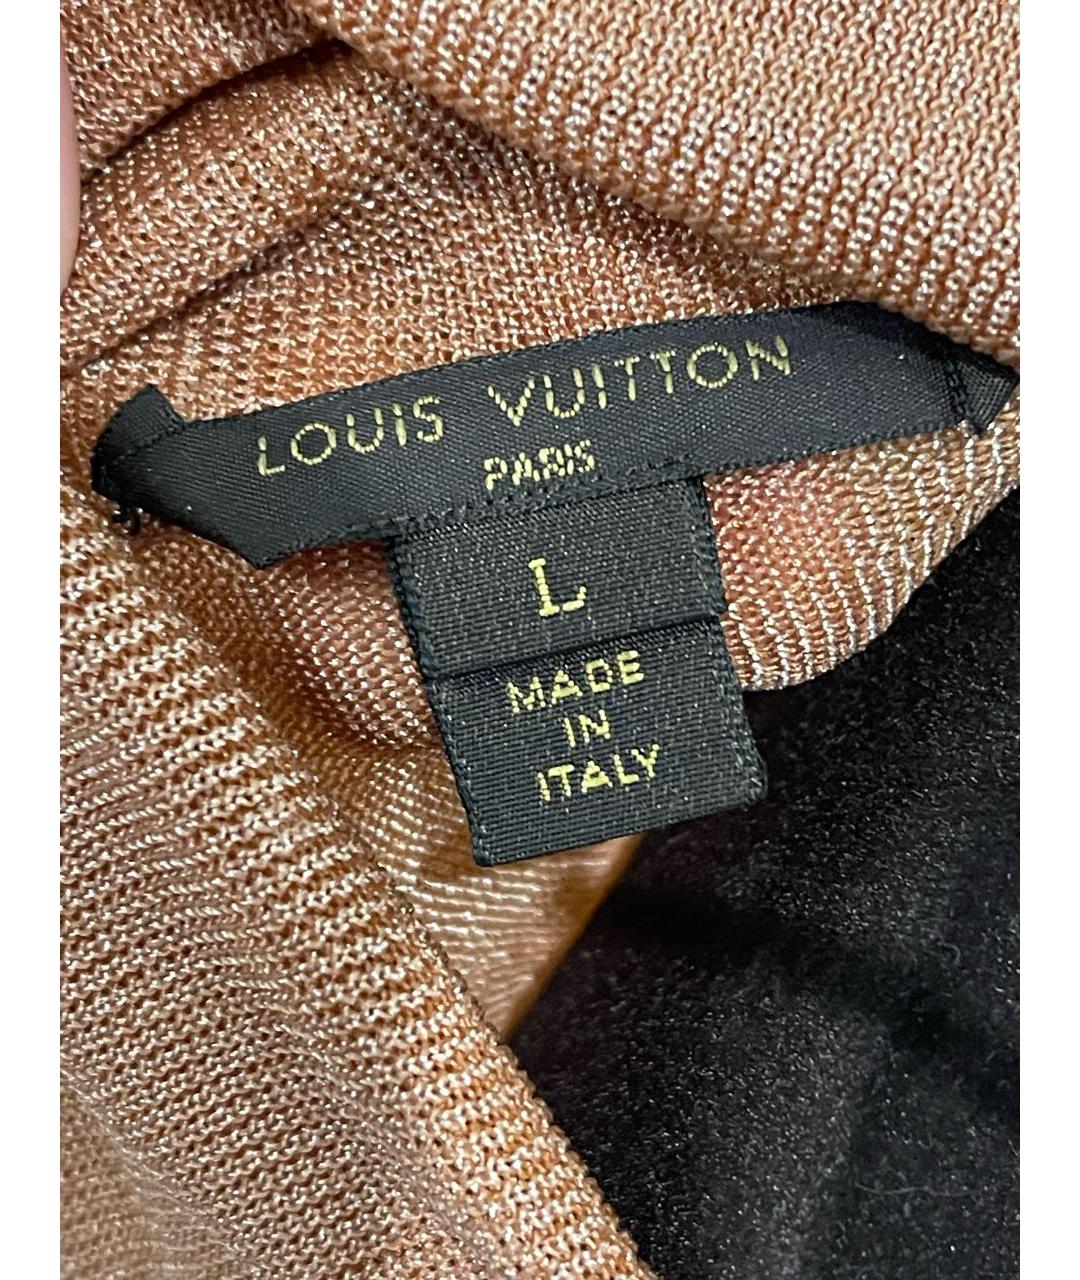 LOUIS VUITTON PRE-OWNED Коралловая водолазка, фото 4